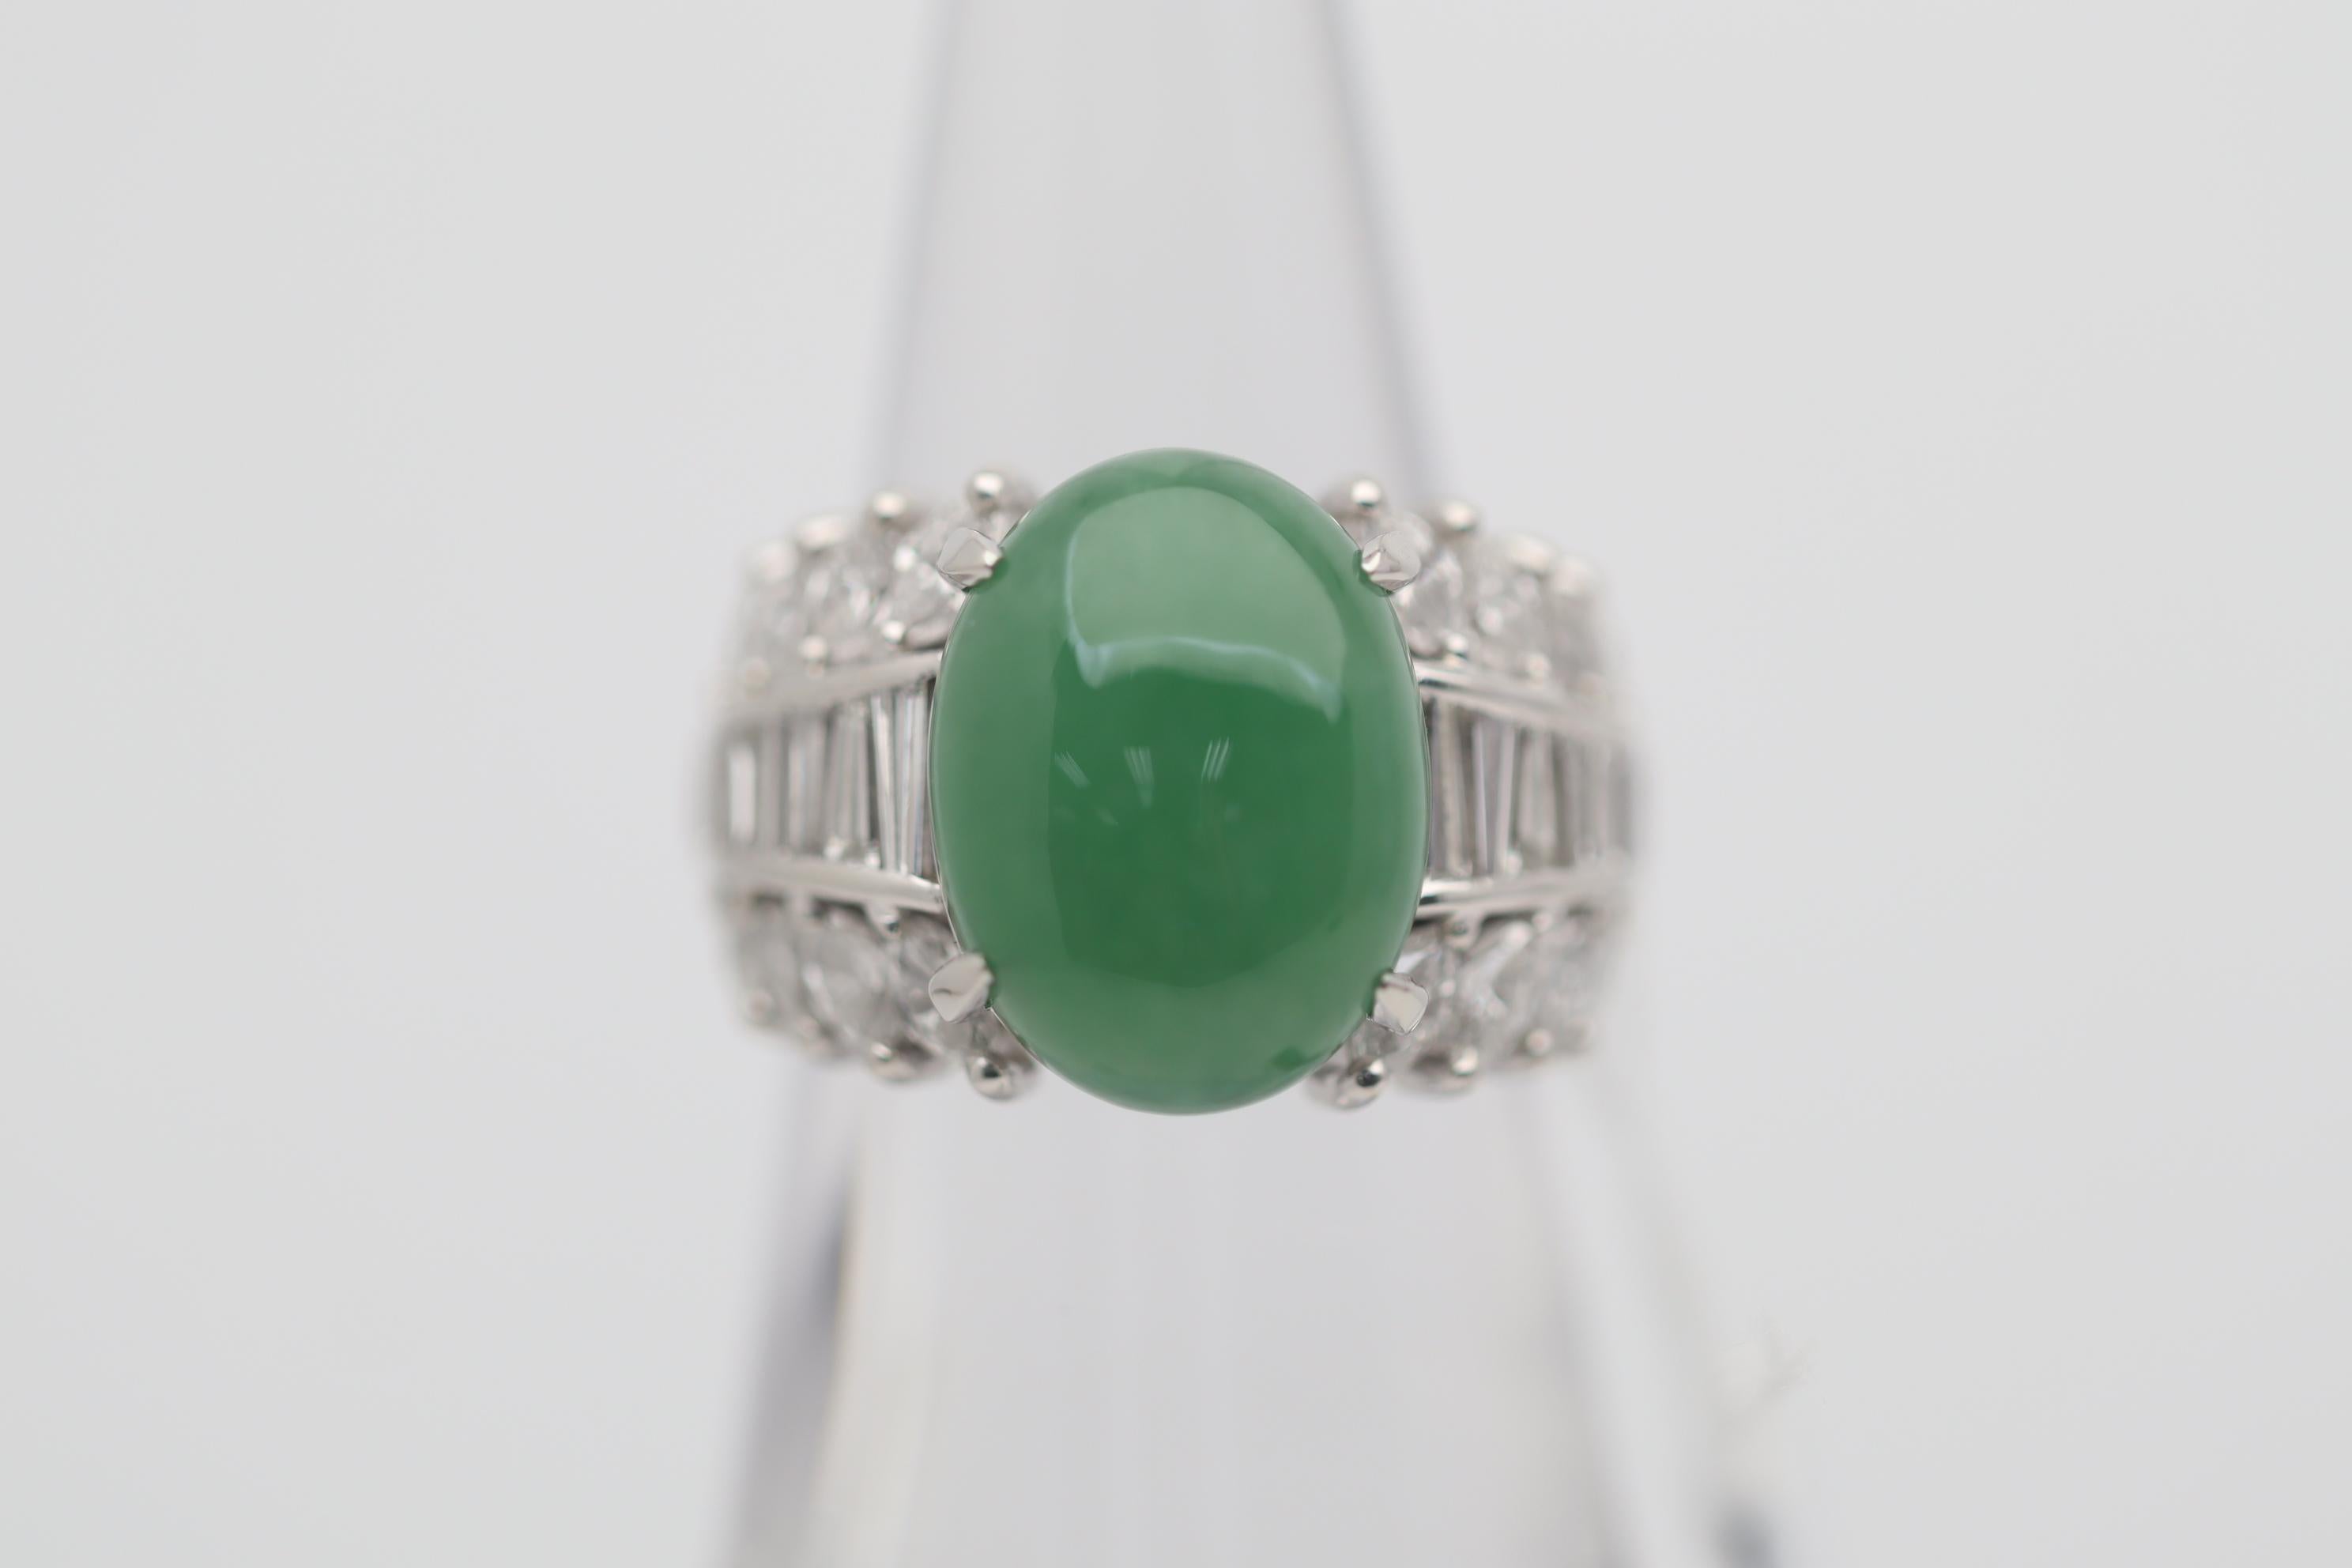 A strong and stylish platinum ring featuring an 8.59 carat jade. It has a pleasing even green color and a smooth domed cabochon finish. It is complemented by 1.88 carats of marquise and baguette-cut diamonds which are set on its sides in a stylish